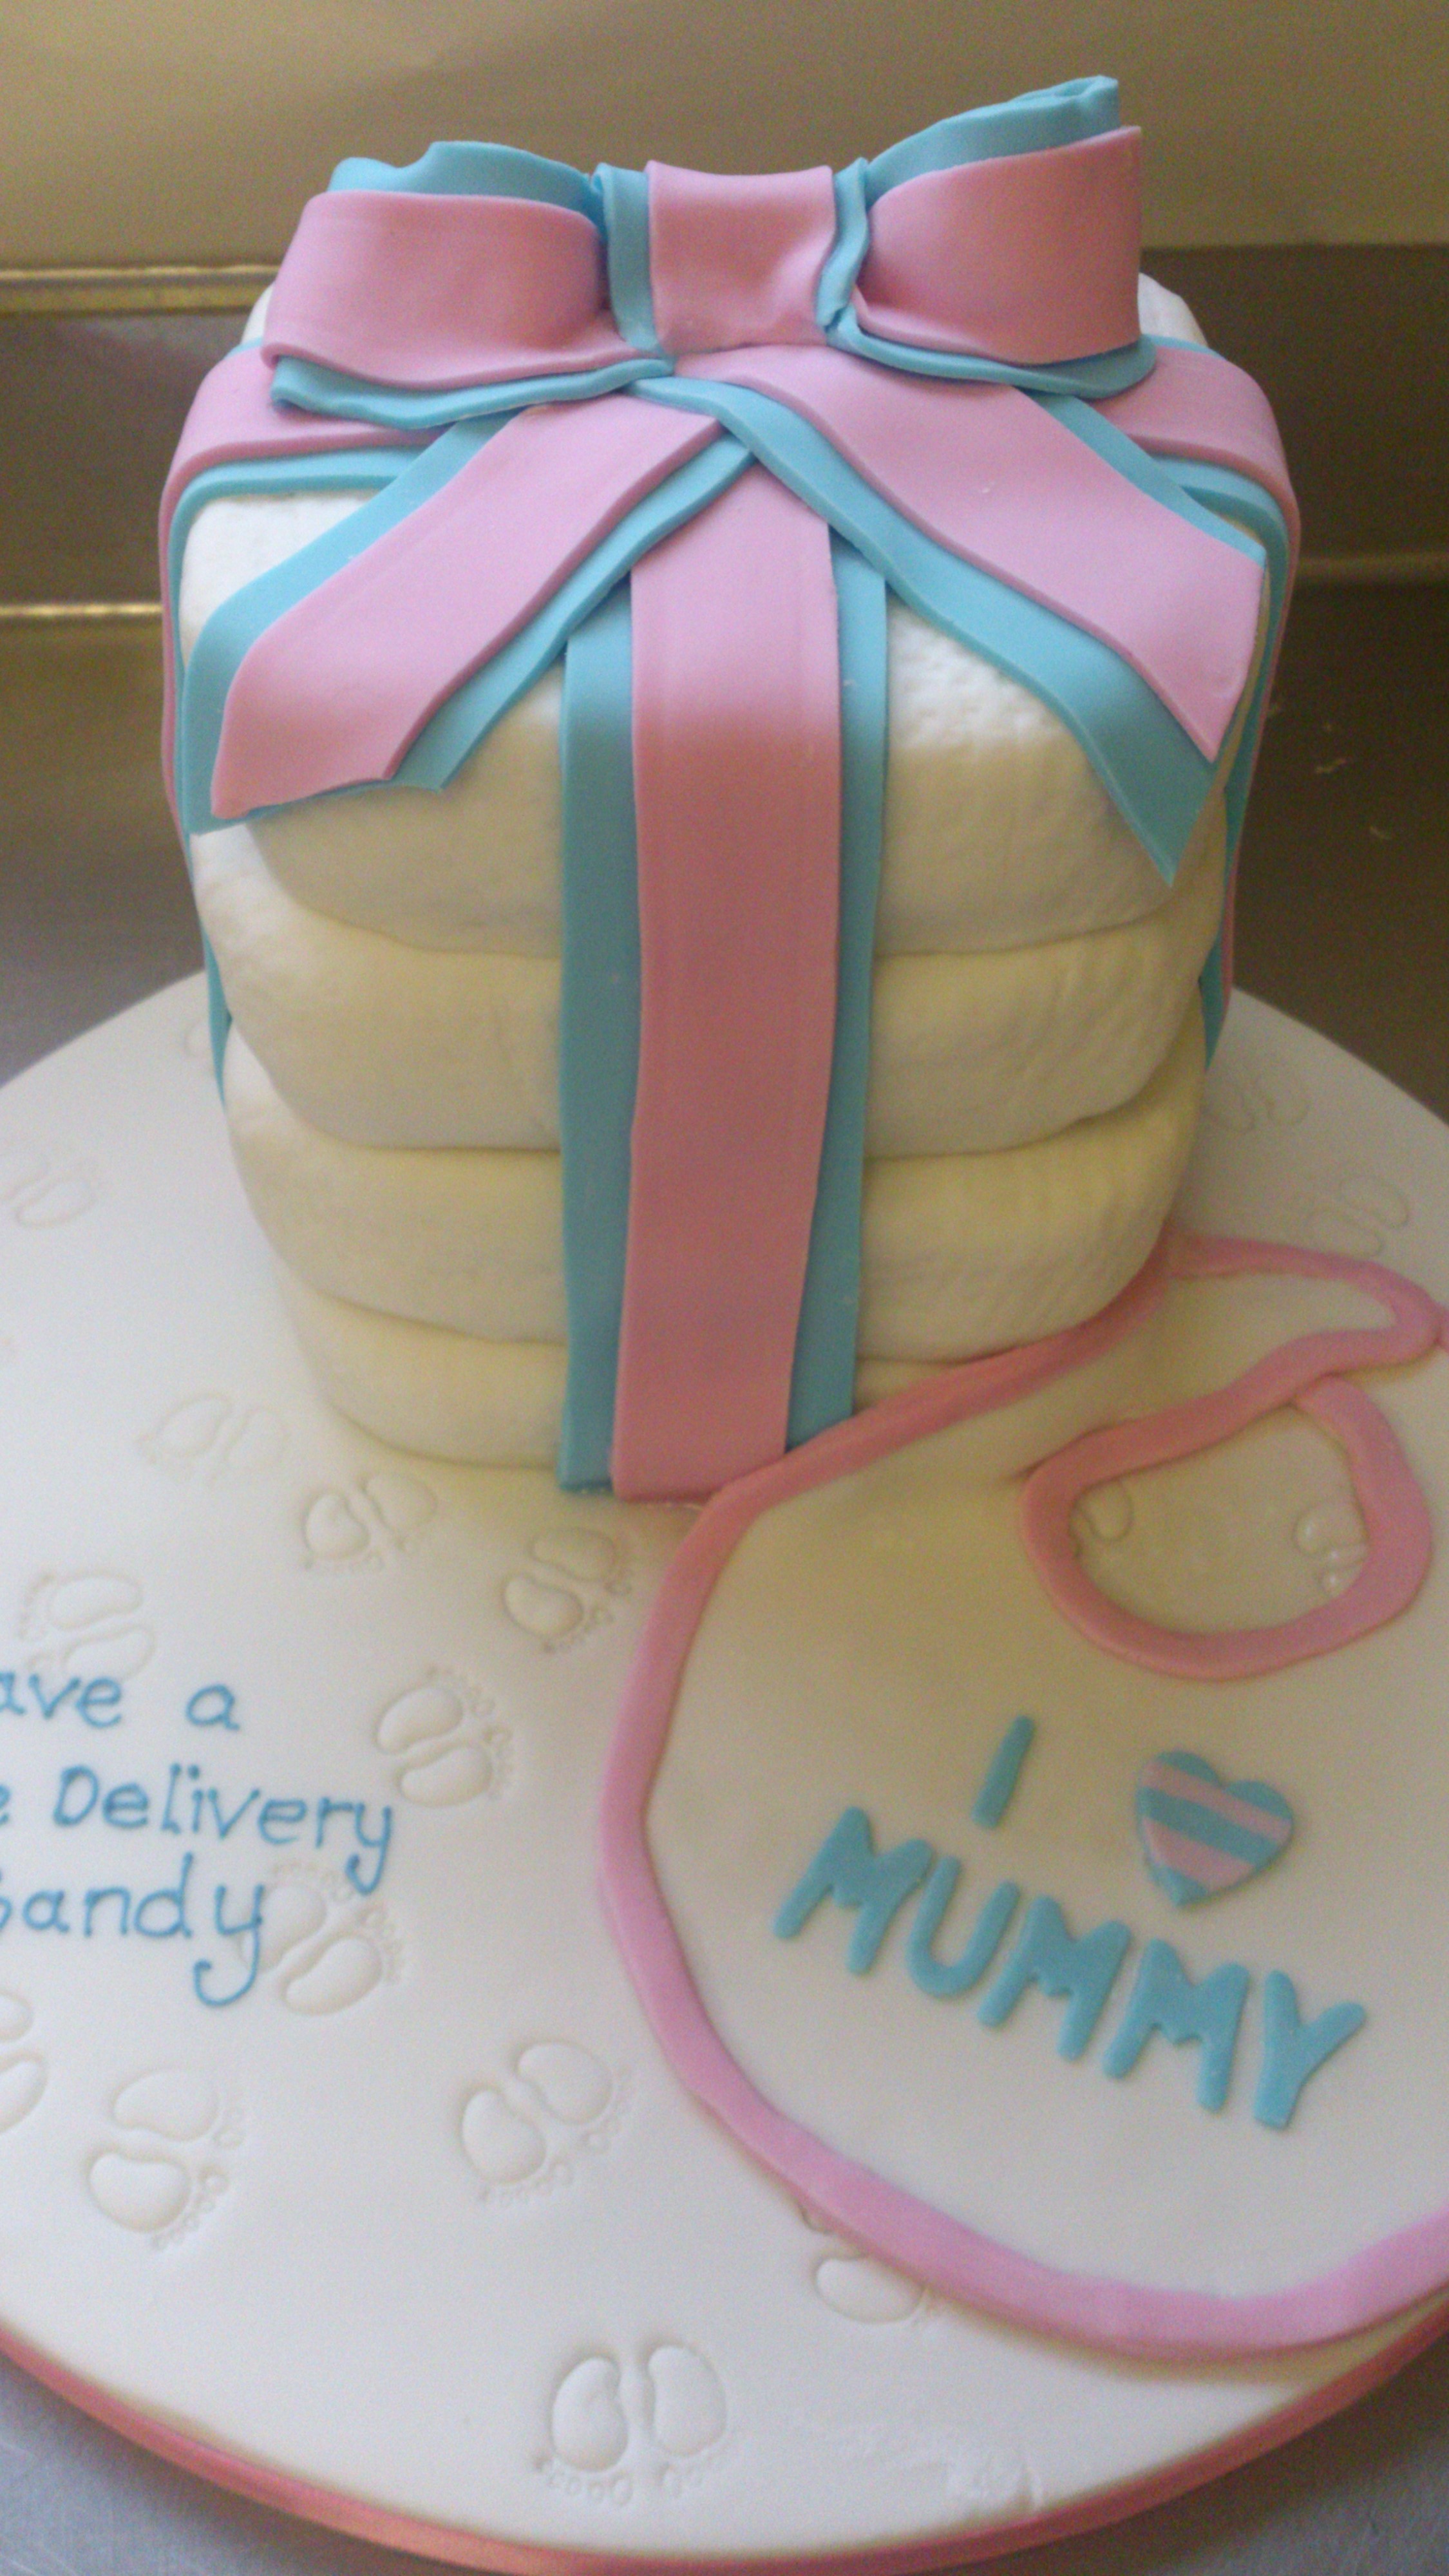 A cake in a the shape of nappies